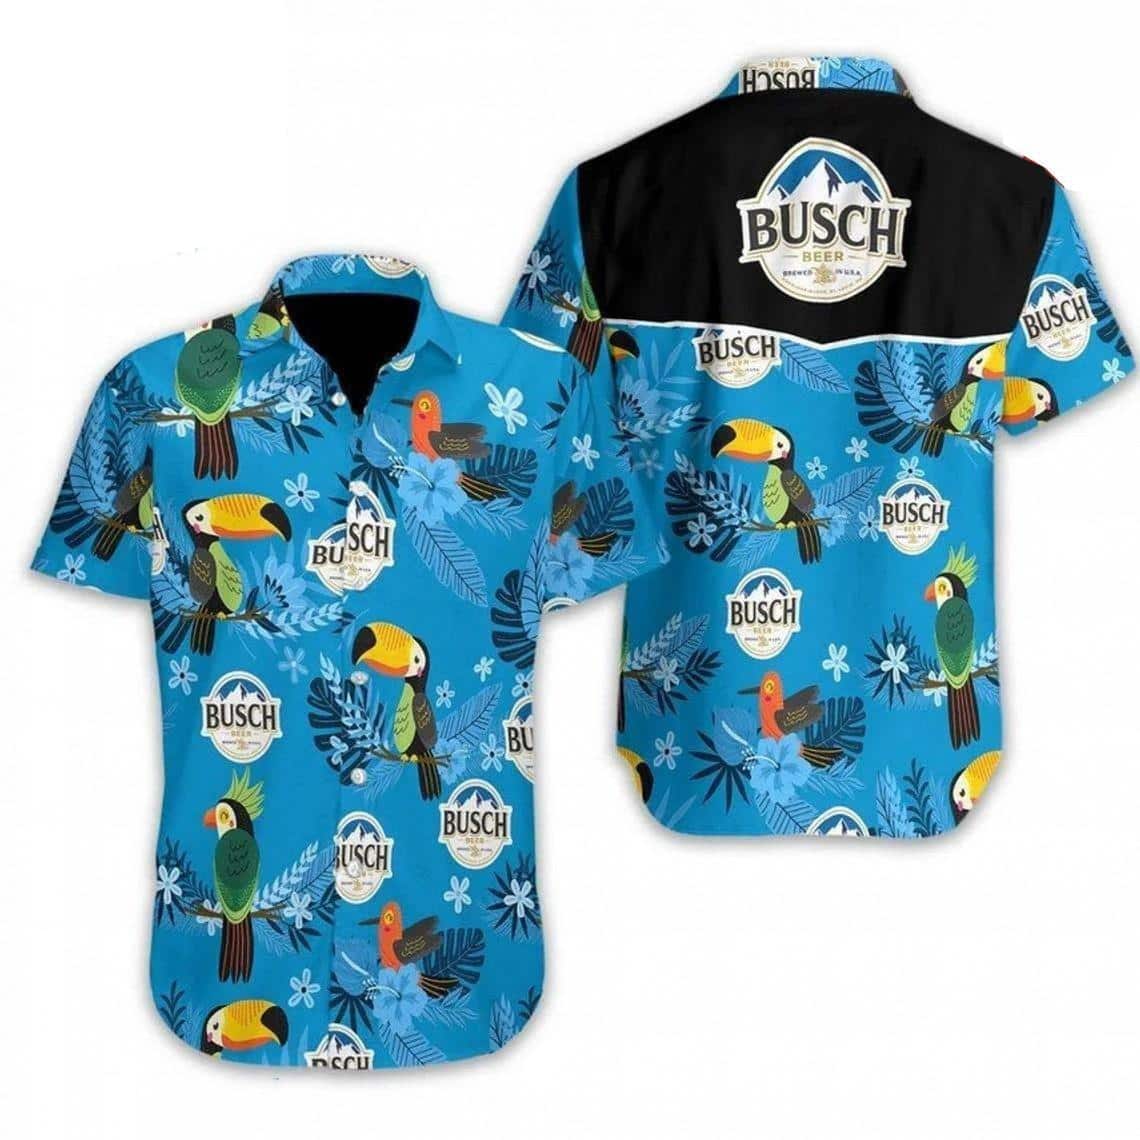 Busch Light Hawaiian Shirt Tropical Flora And Fauna Special Gift For Beer Lovers